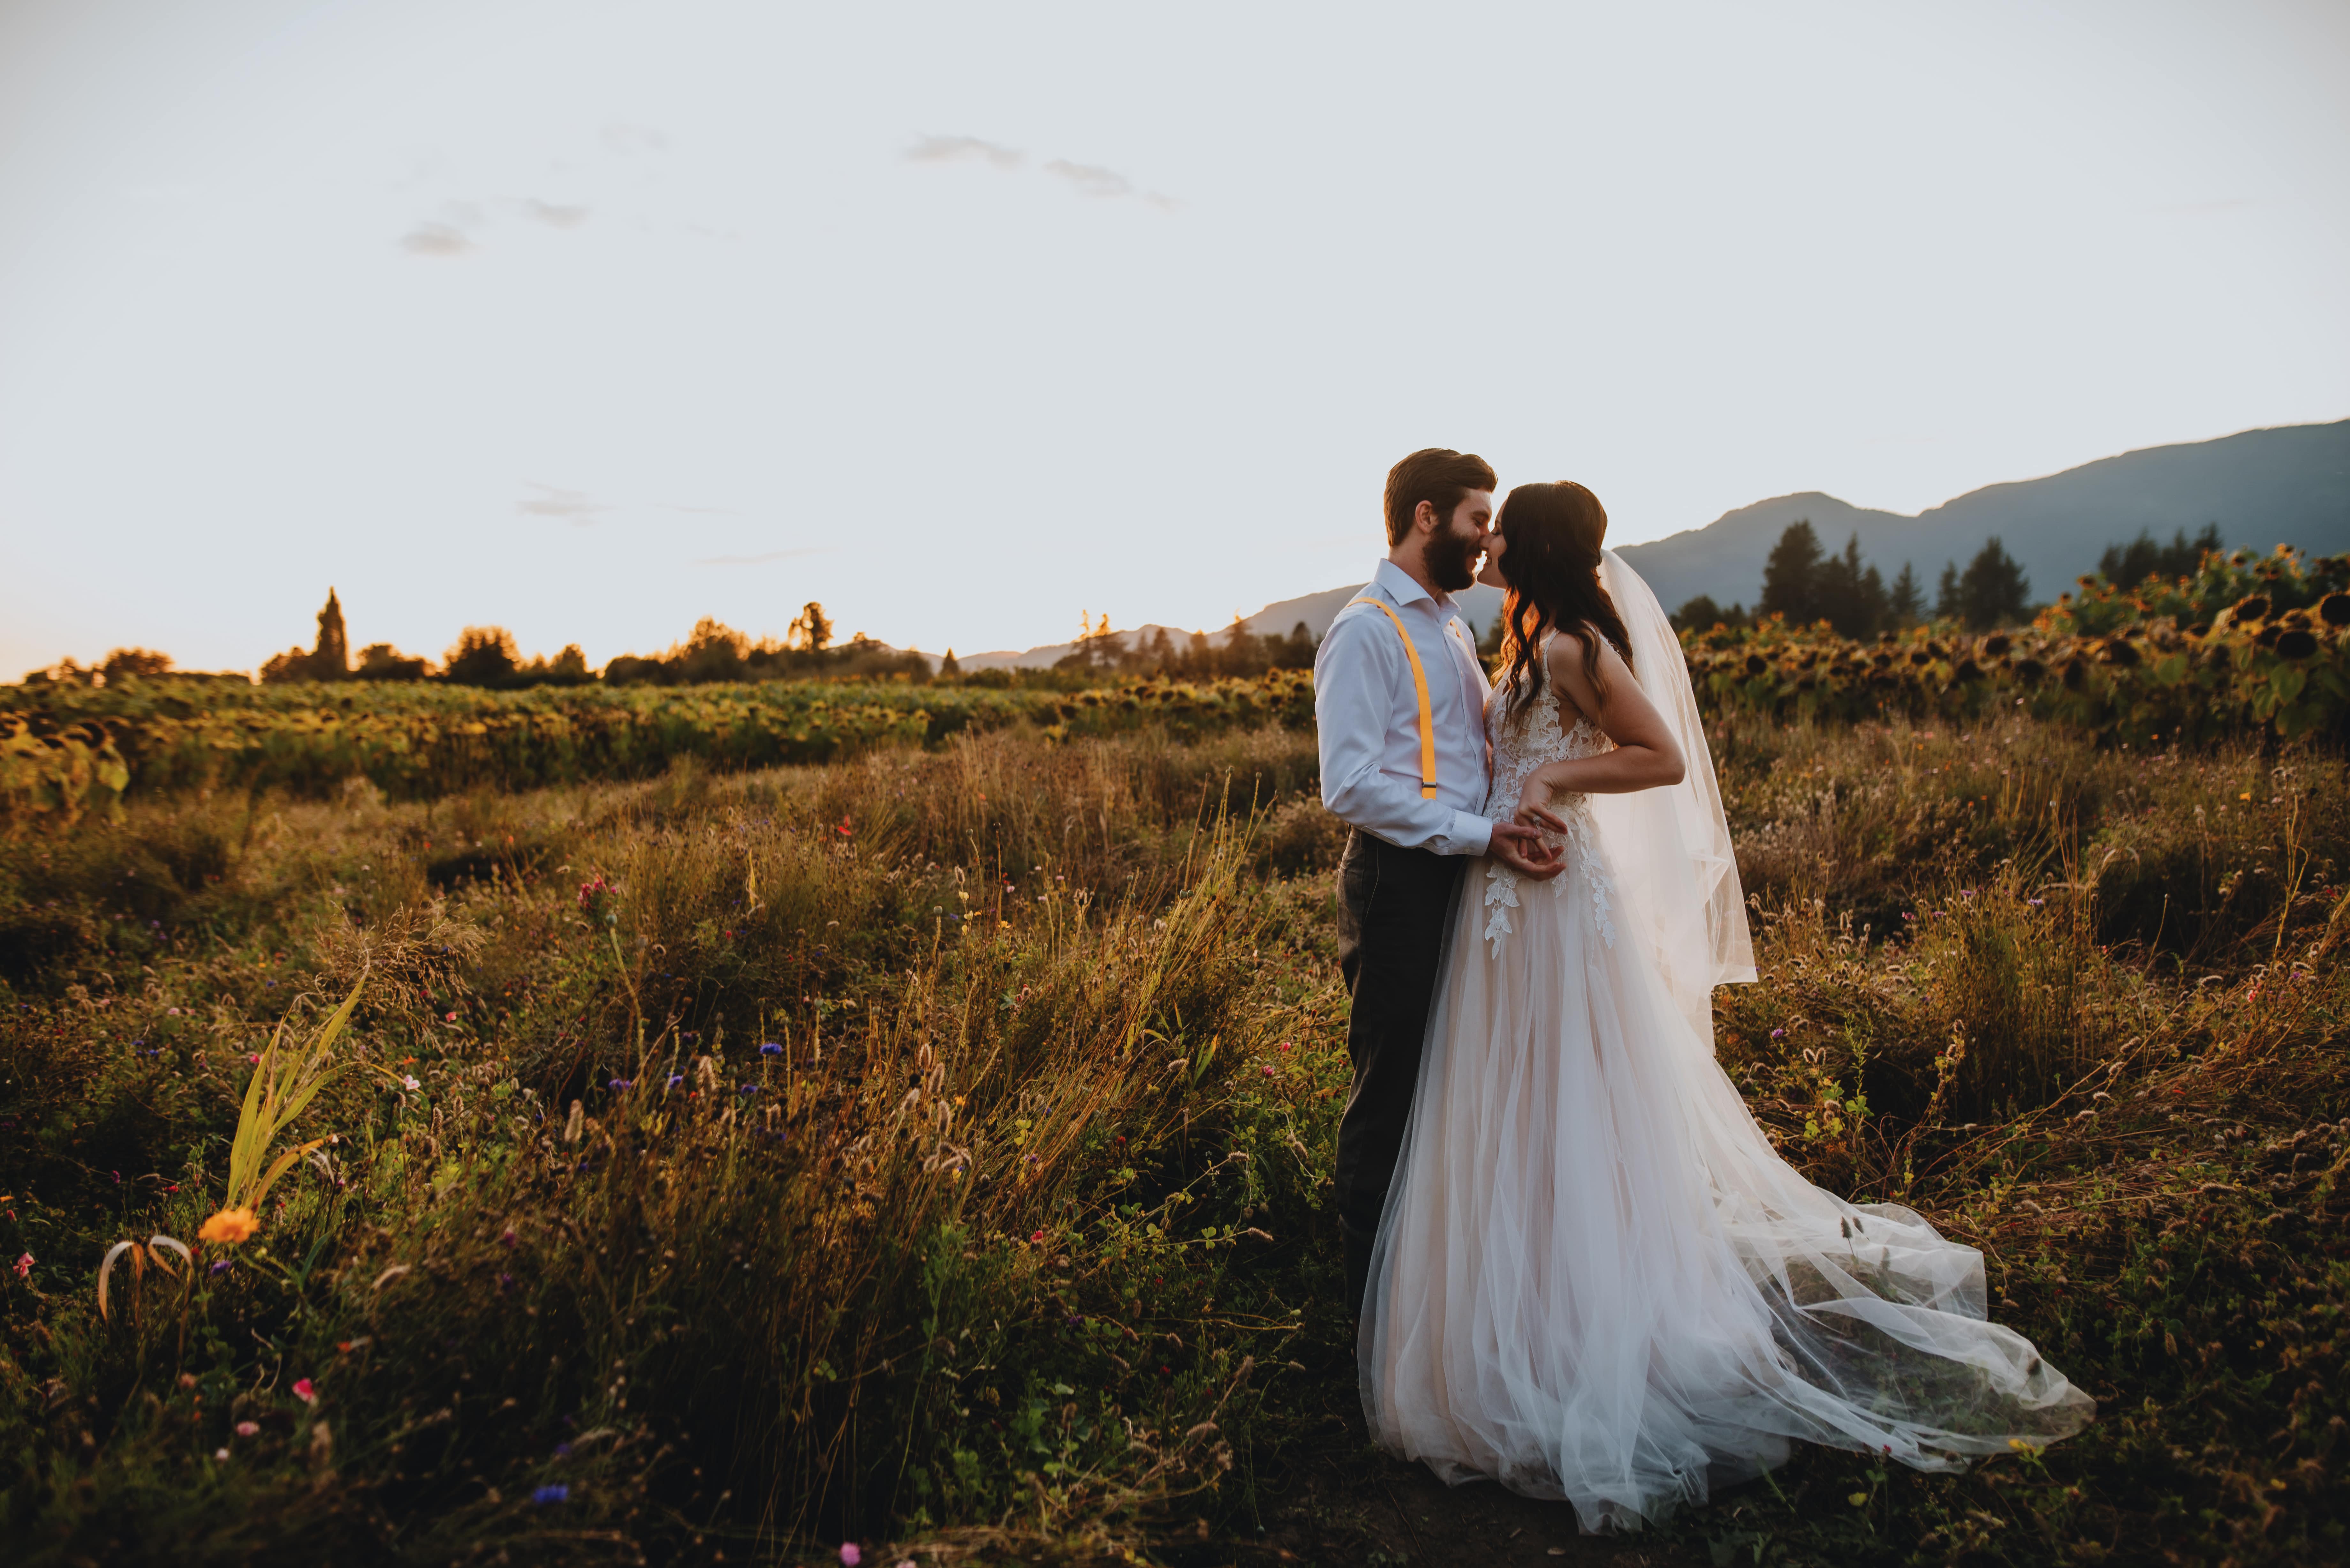 bride and groom's first look on their wedding day in a field